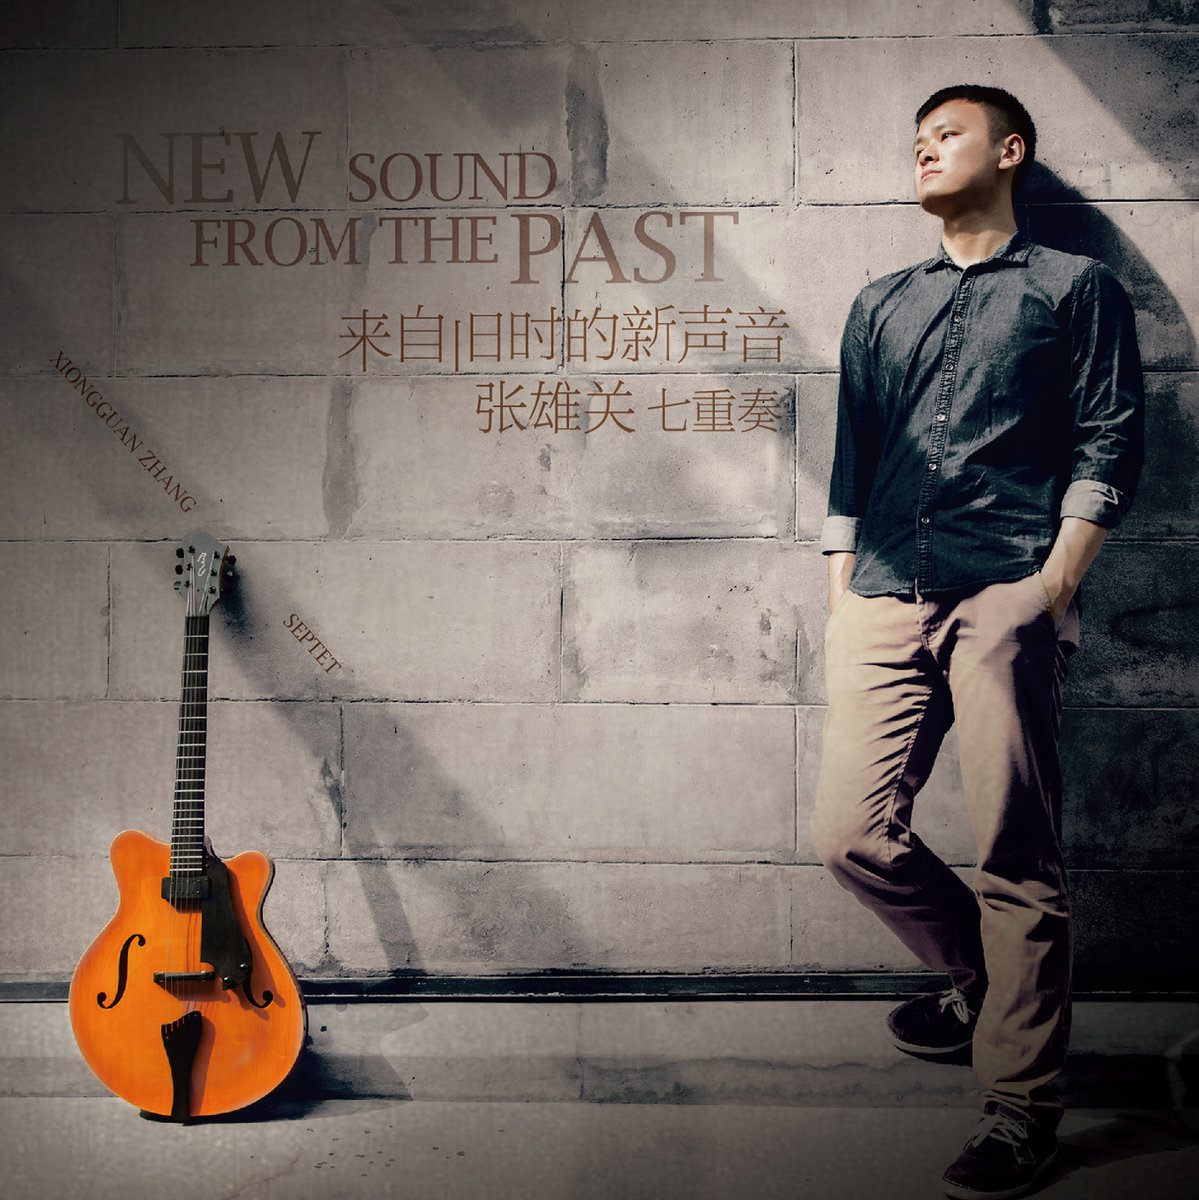 Zhang Xiongguan: New Sound from the Past